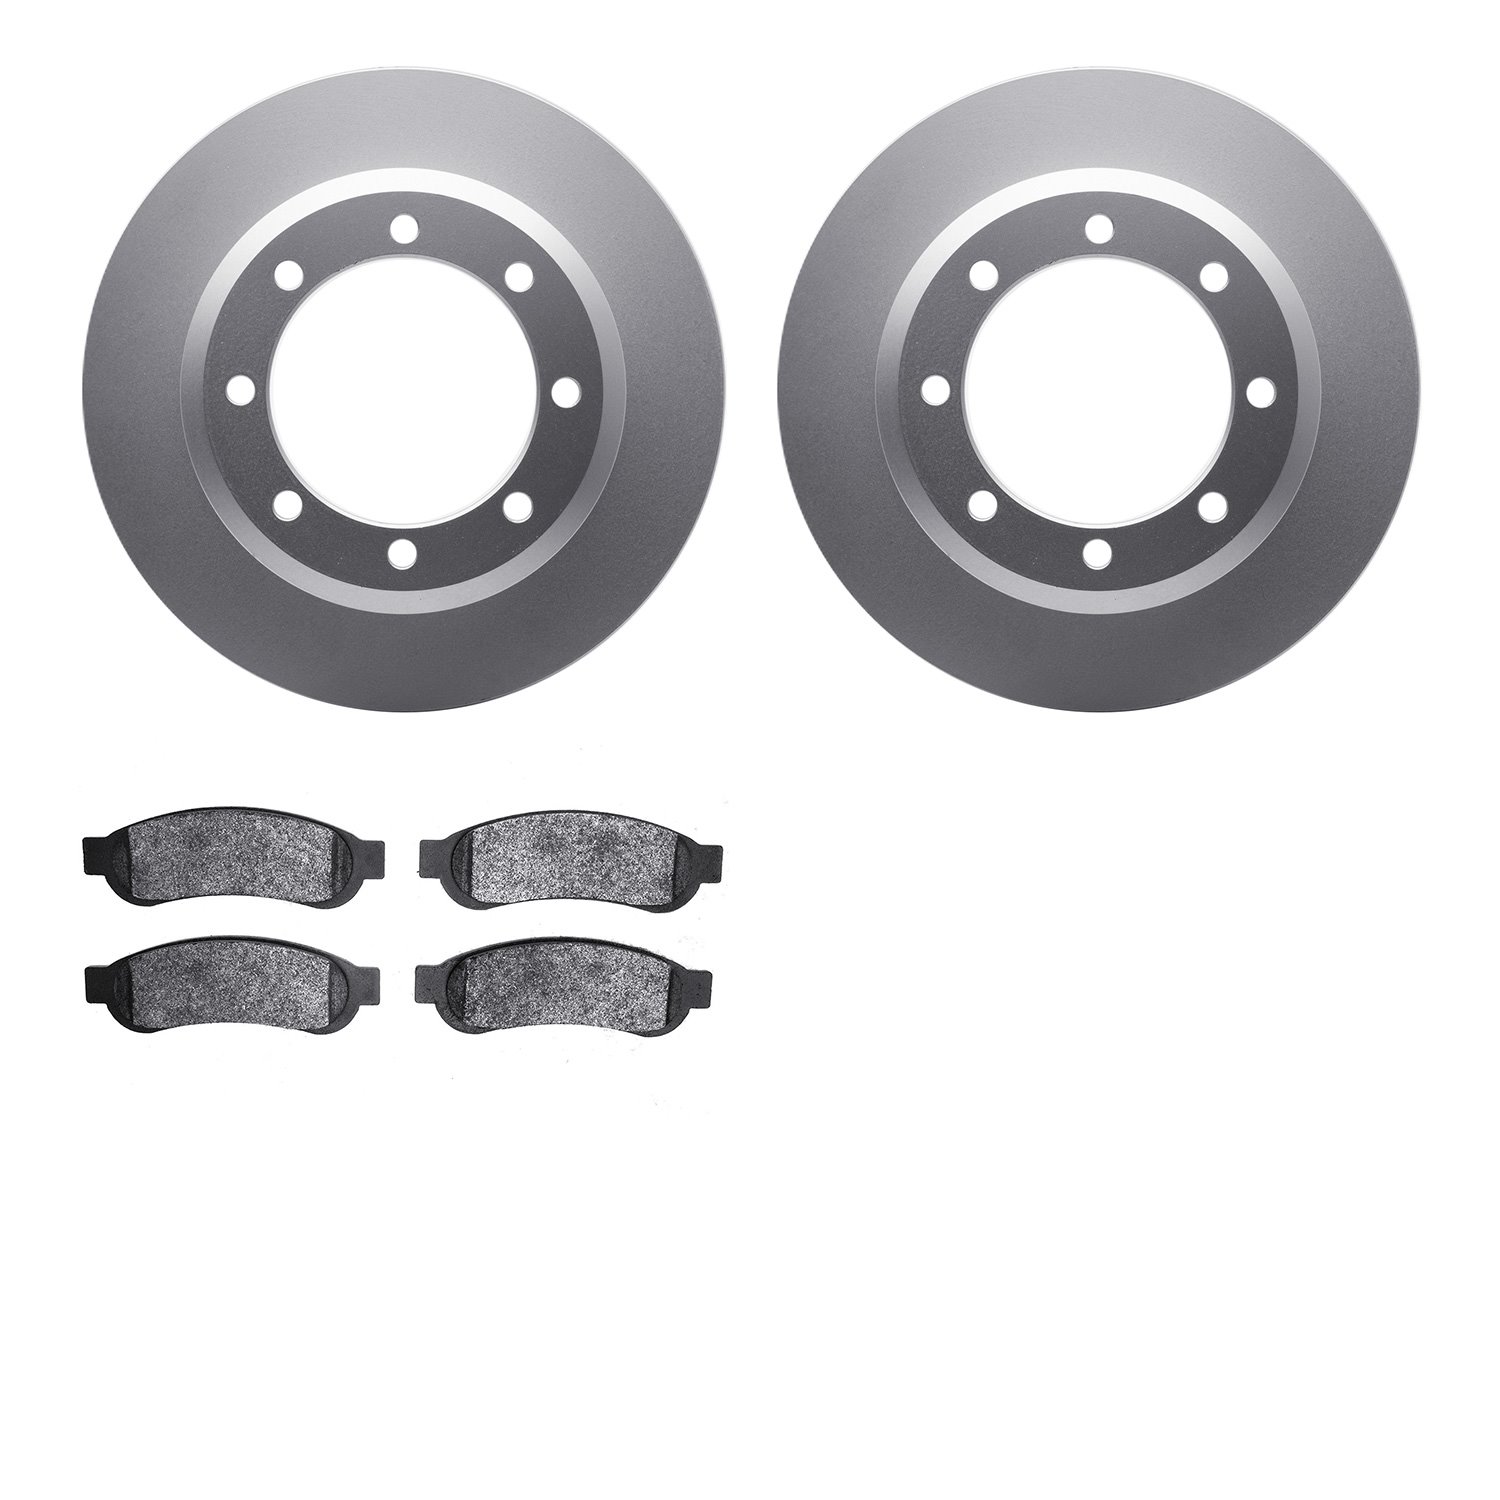 4402-54059 Geospec Brake Rotors with Ultimate-Duty Brake Pads Kit, 2010-2012 Ford/Lincoln/Mercury/Mazda, Position: Rear